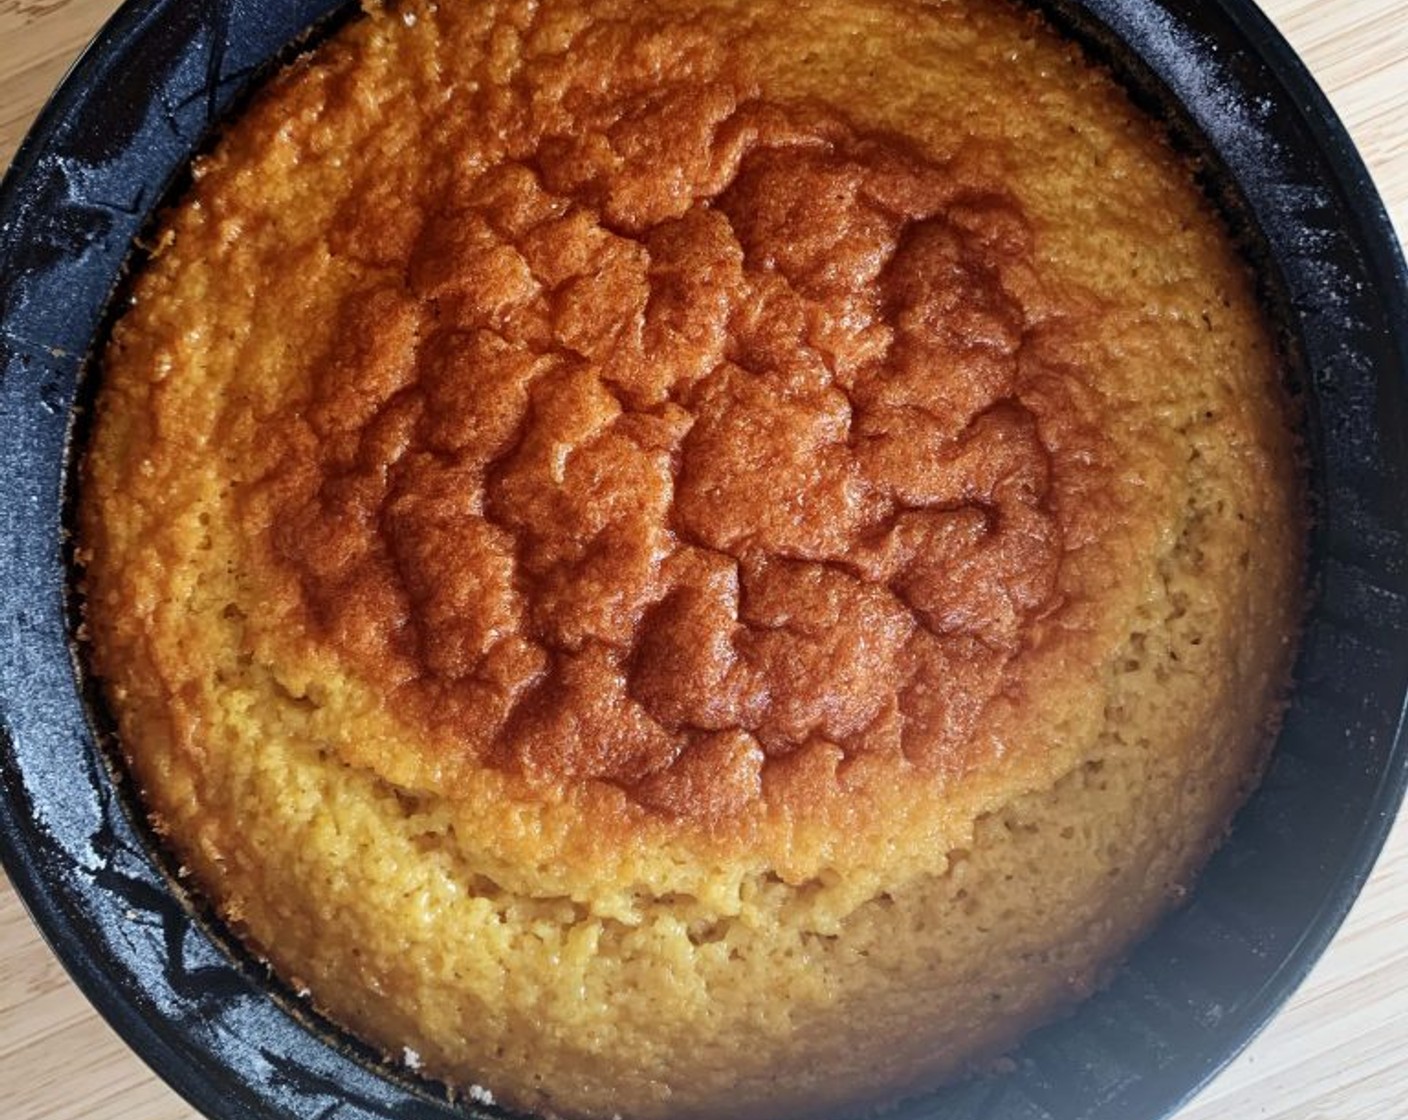 step 6 Bake the cake in the preheated oven at 350 degrees F (180 degrees C) for about 40-50 minutes.